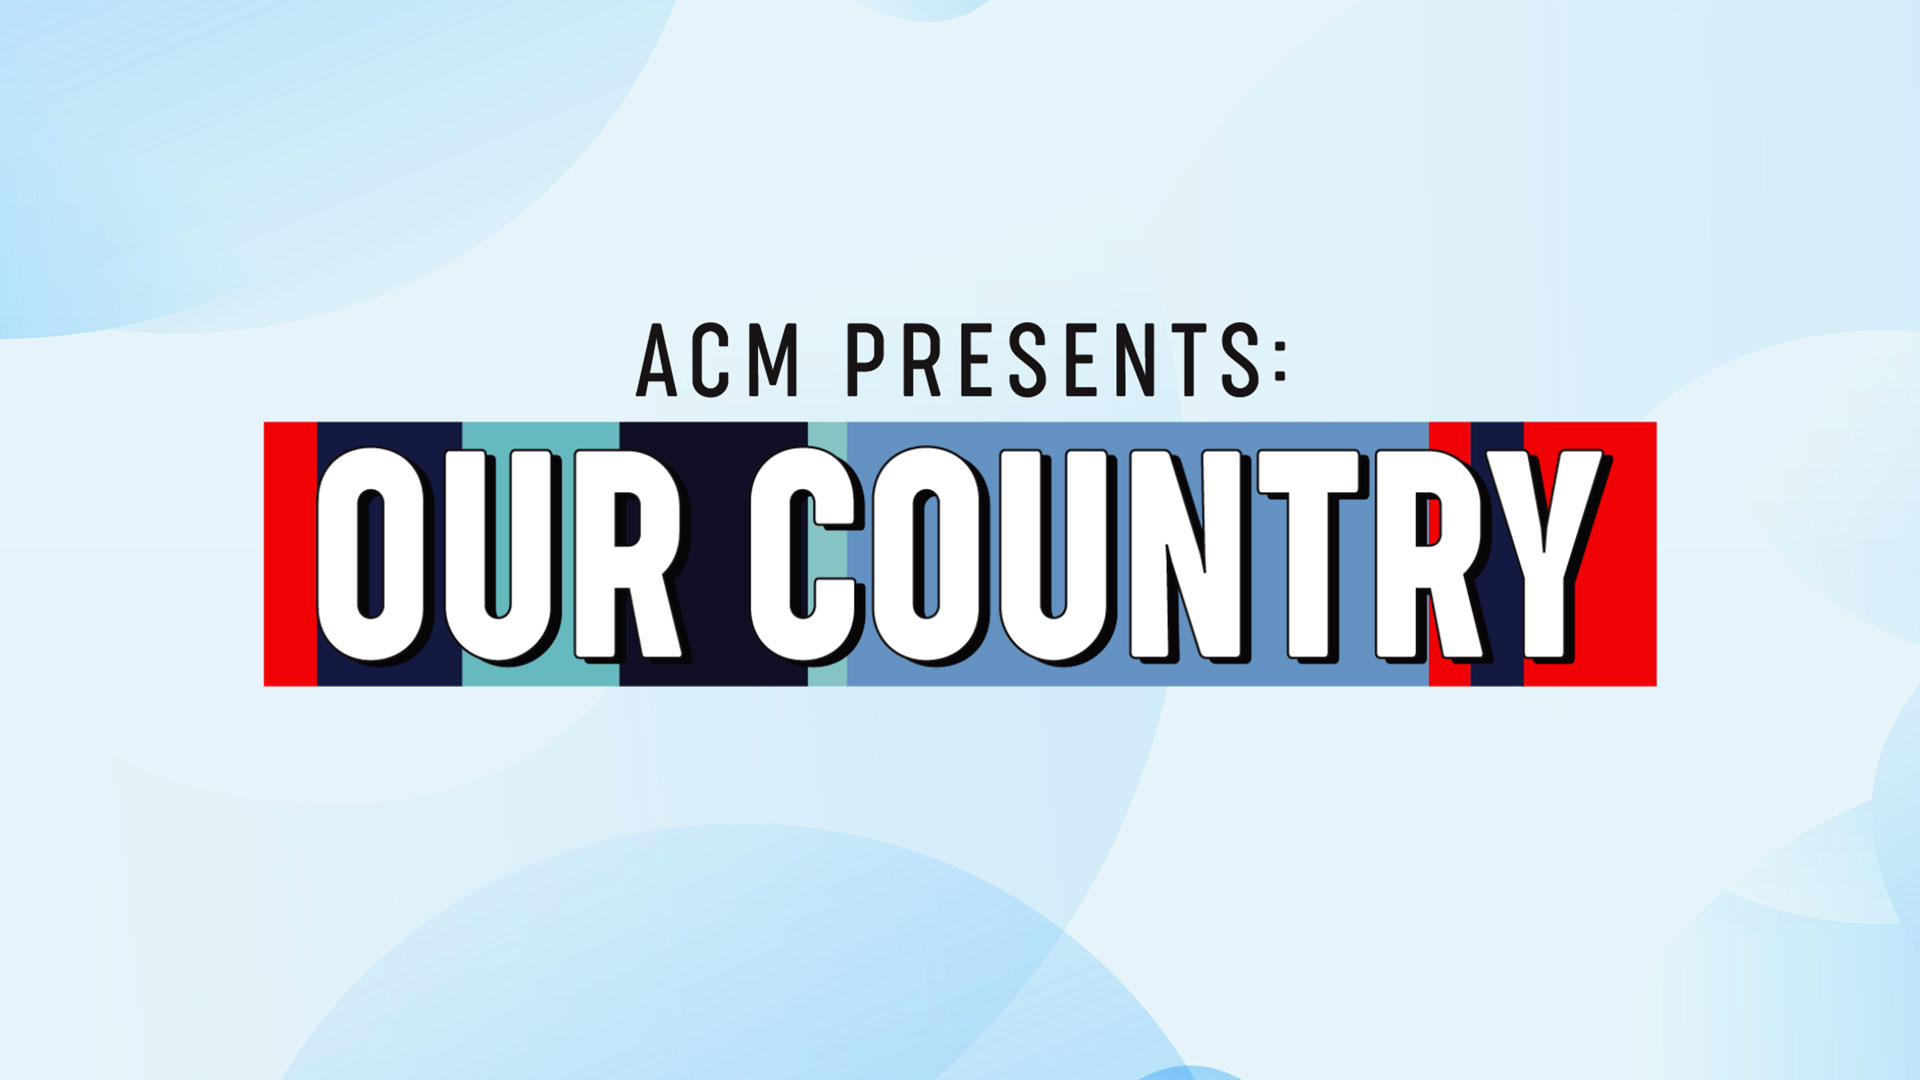 How And When To Watch ACM Presents Our Country On CBS And CBS All Access